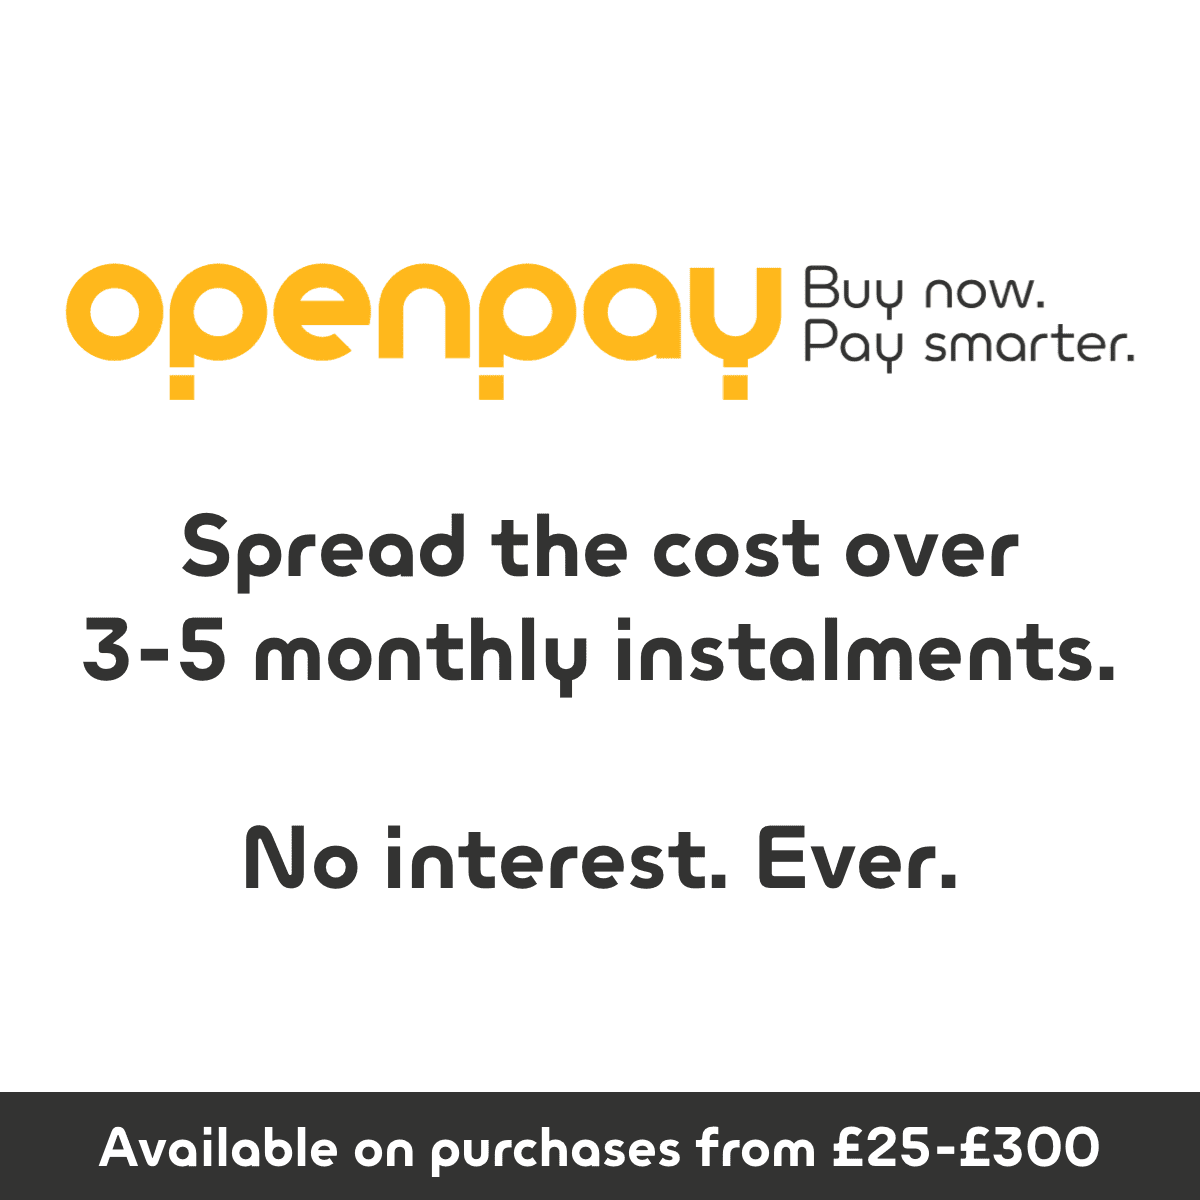 shop with openpay